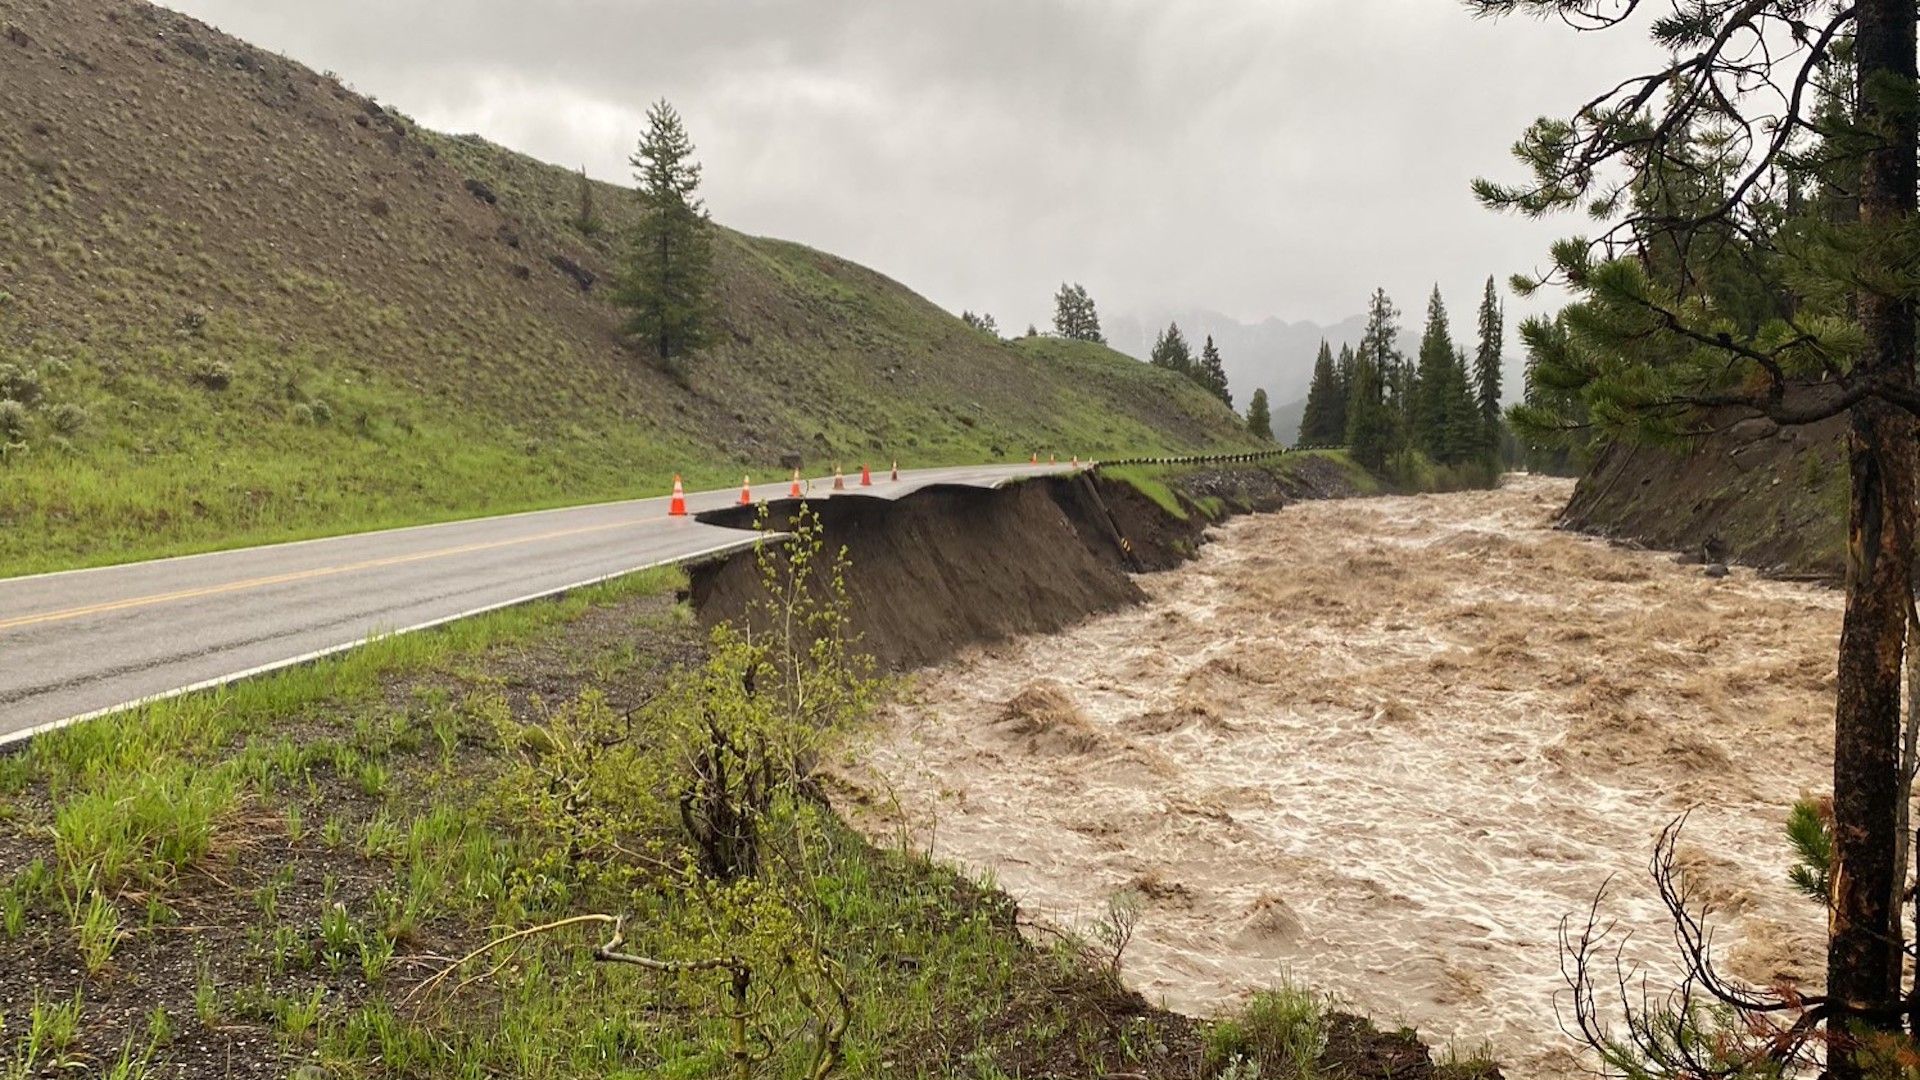 Image of a raging river and collapsing road in Yellowstone National Park.